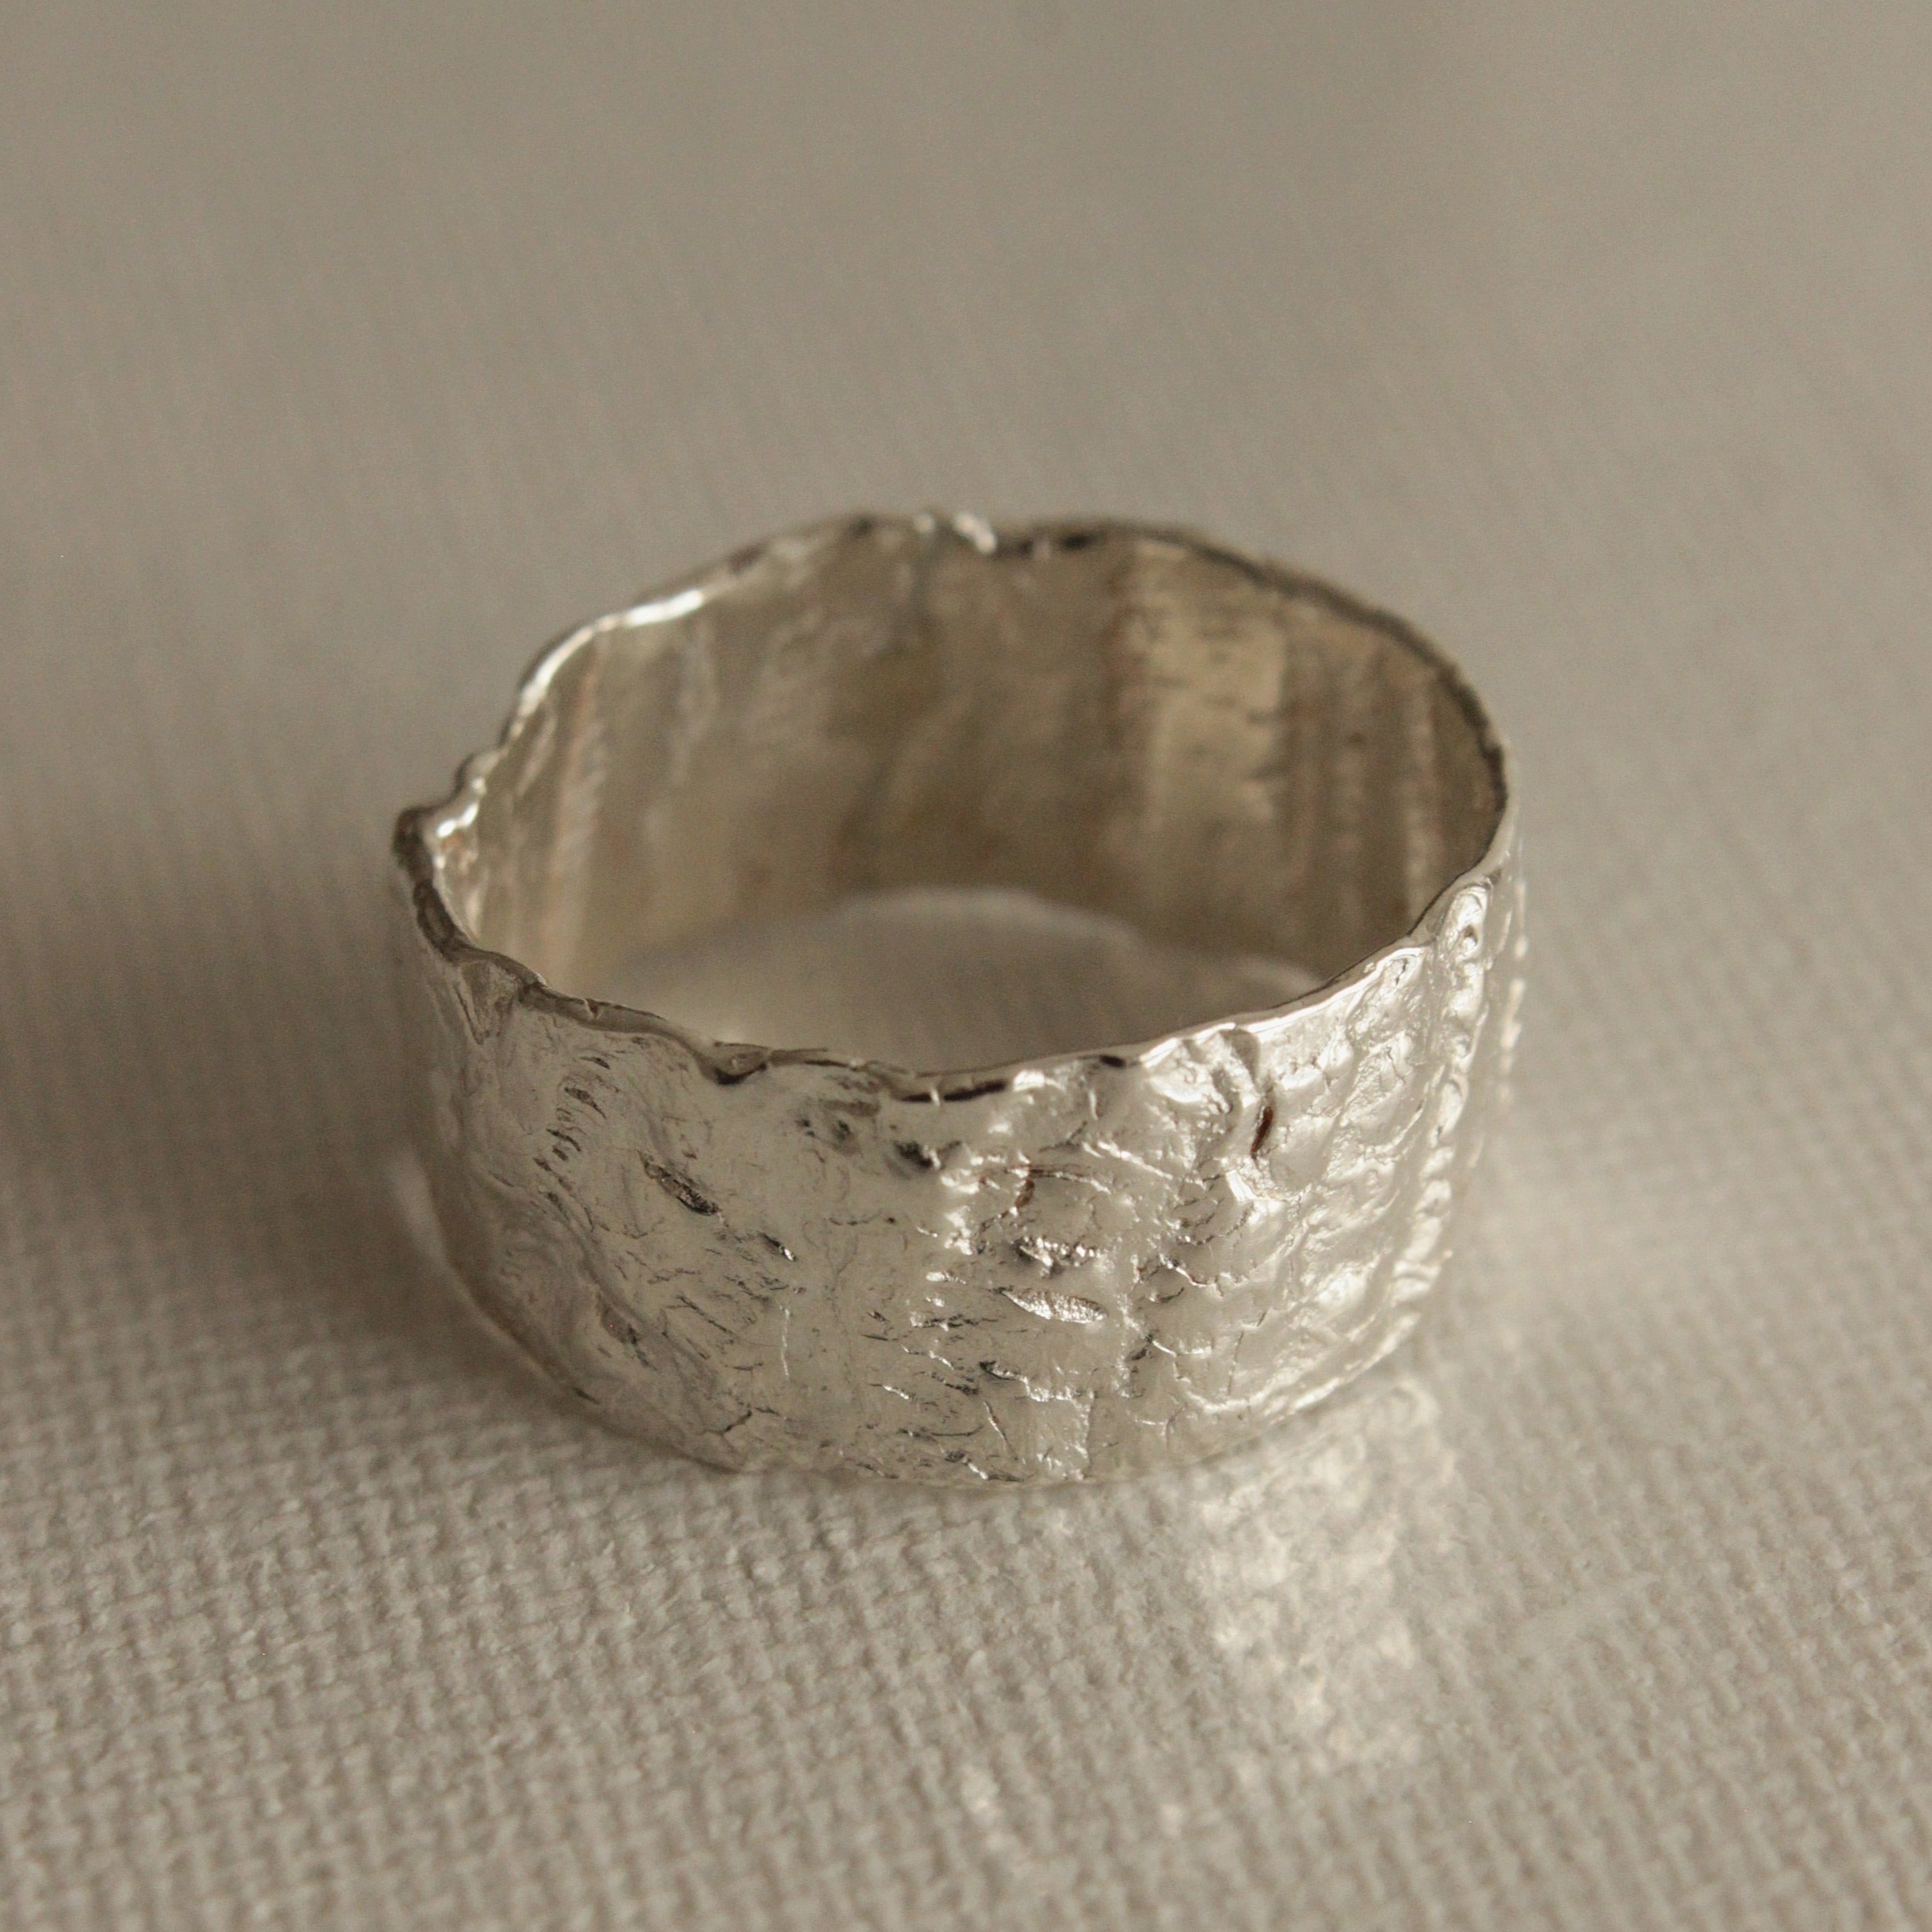 The textured ring features a stunning shell imprint, hidden scale details and elements of the human touch. This special ring is delicate, yet a statement, making it the perfect addition to your collection. Enjoy this piece everyday and let its oceanic texture transport you to the deepest depths of the ocean. 